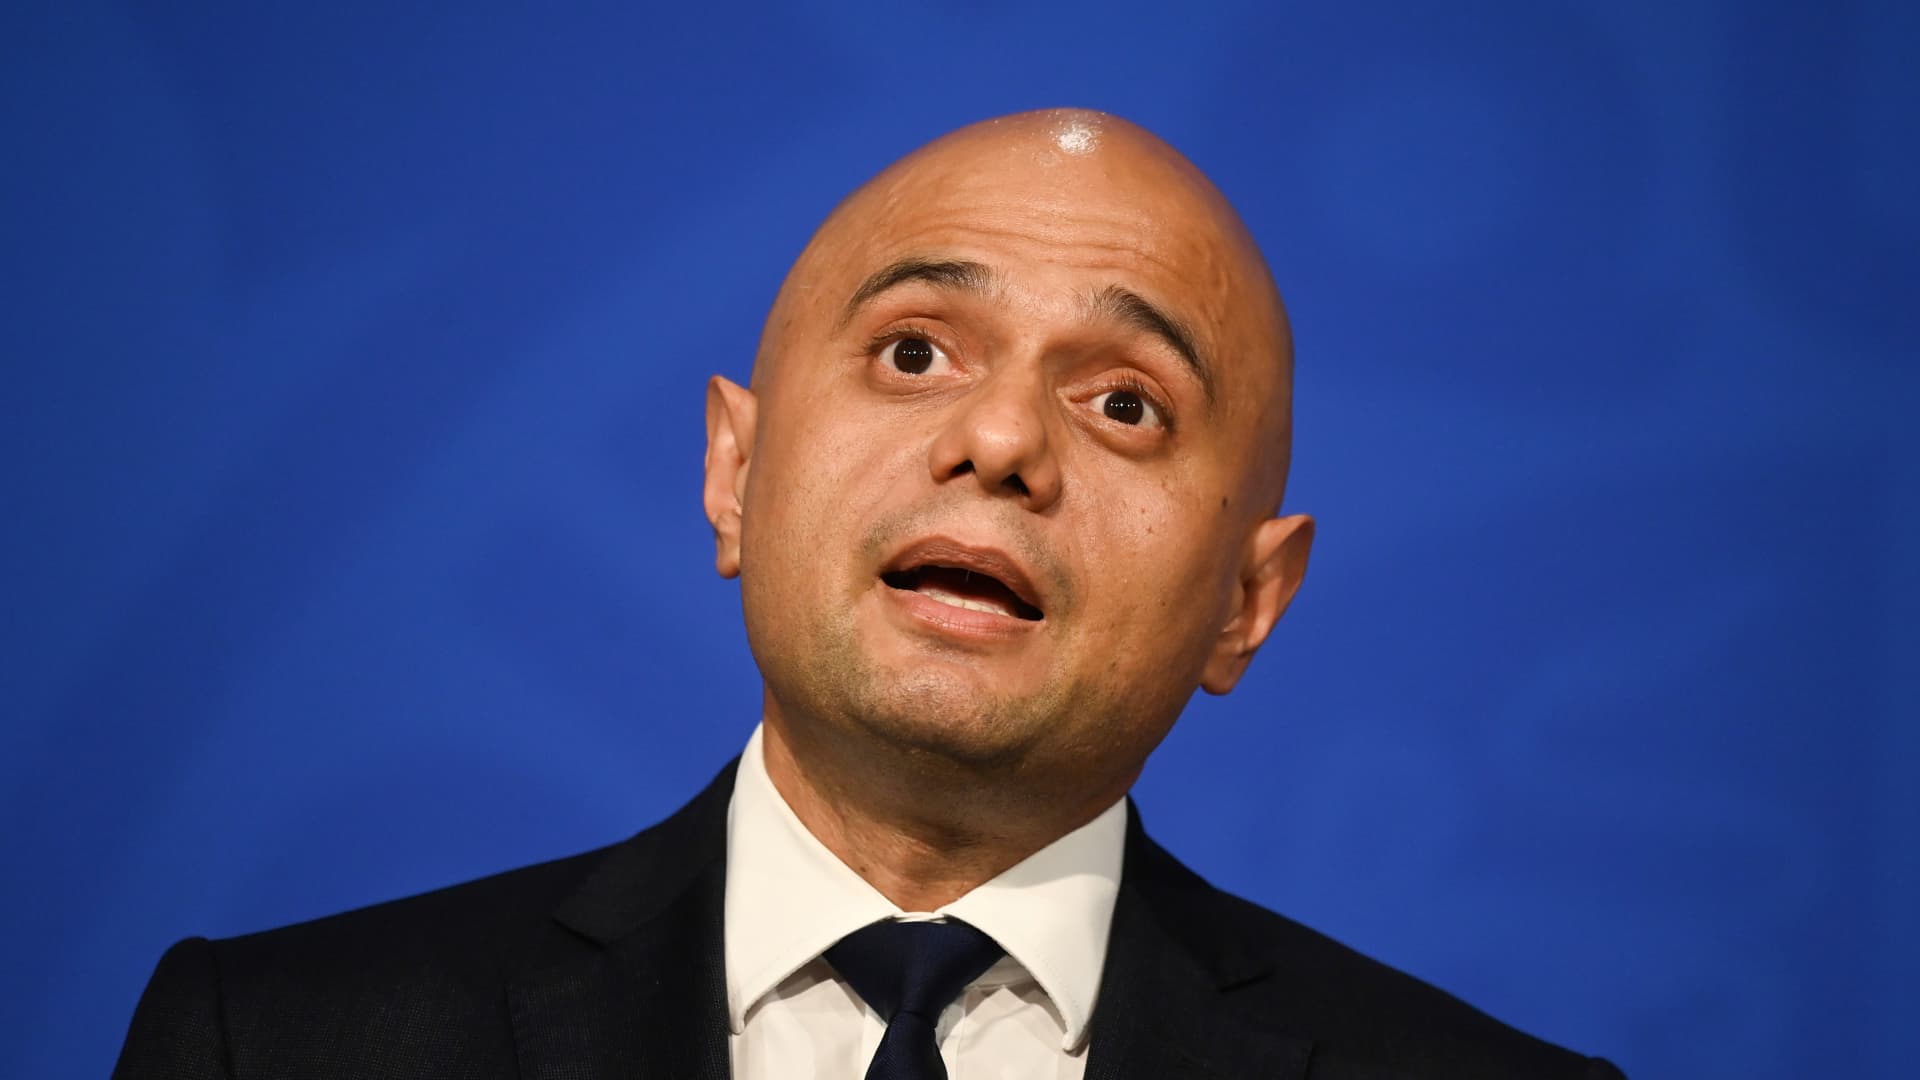 Britain's Health Secretary Sajid Javid speaks during a press conference at Downing Street on October 20, 2021 in London, England.